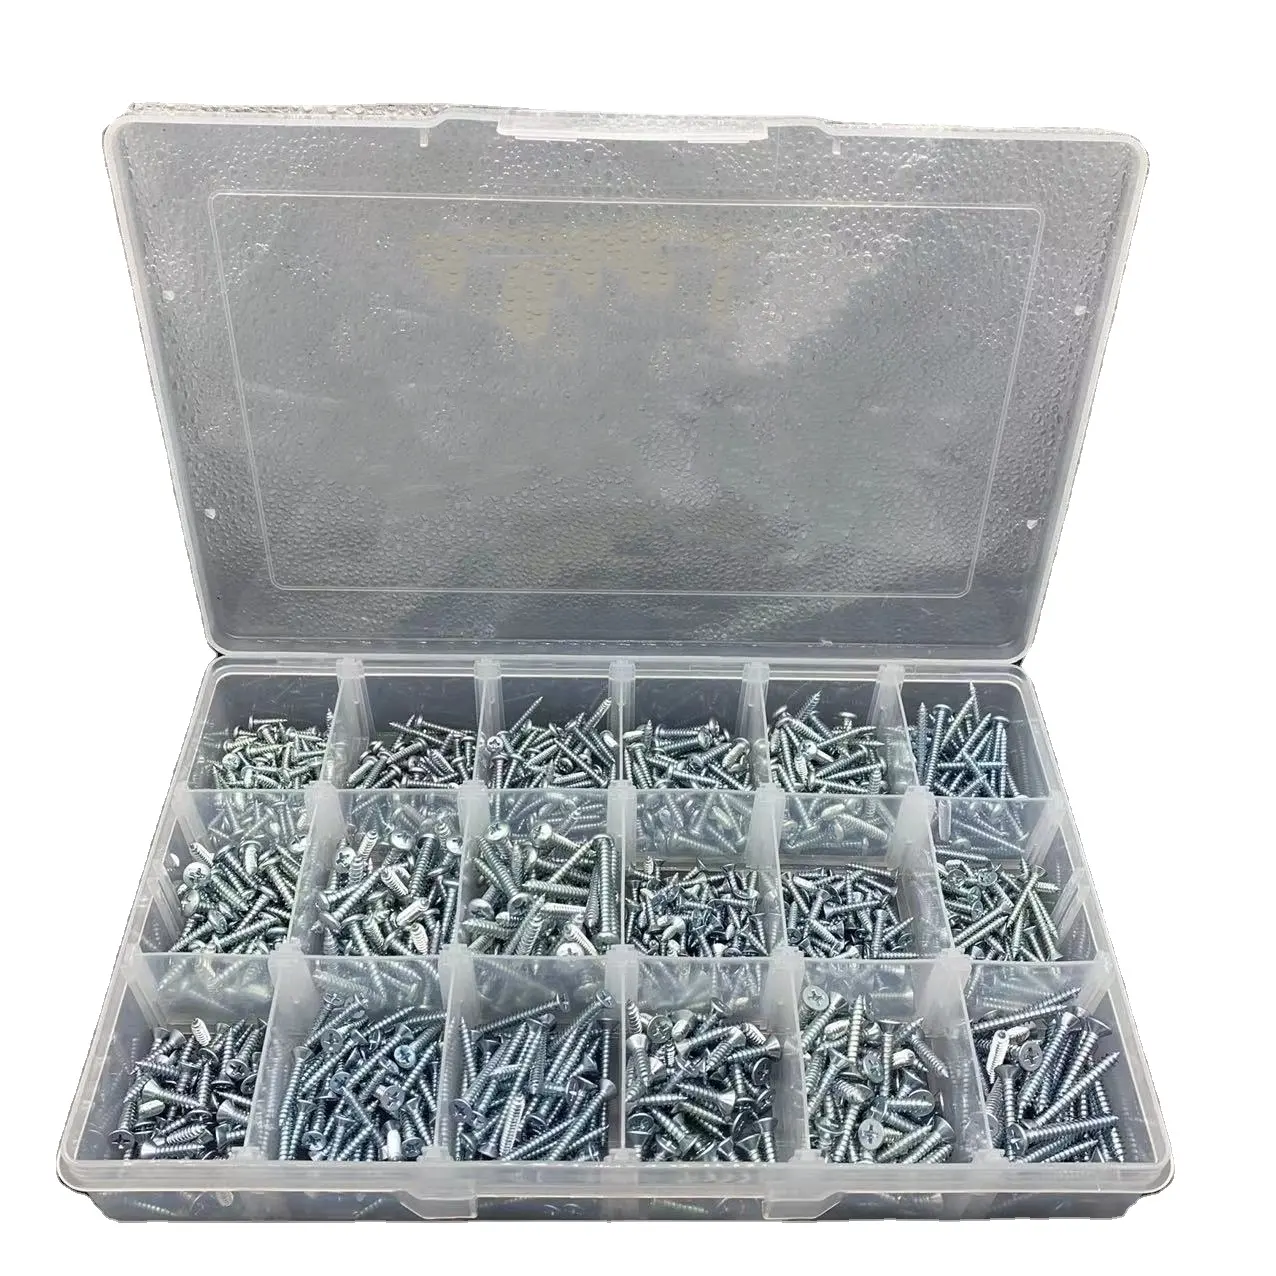 720Pcs Phillips Pan Head Carbon Steel Zinc Plated Self-Tapping Screw Kit